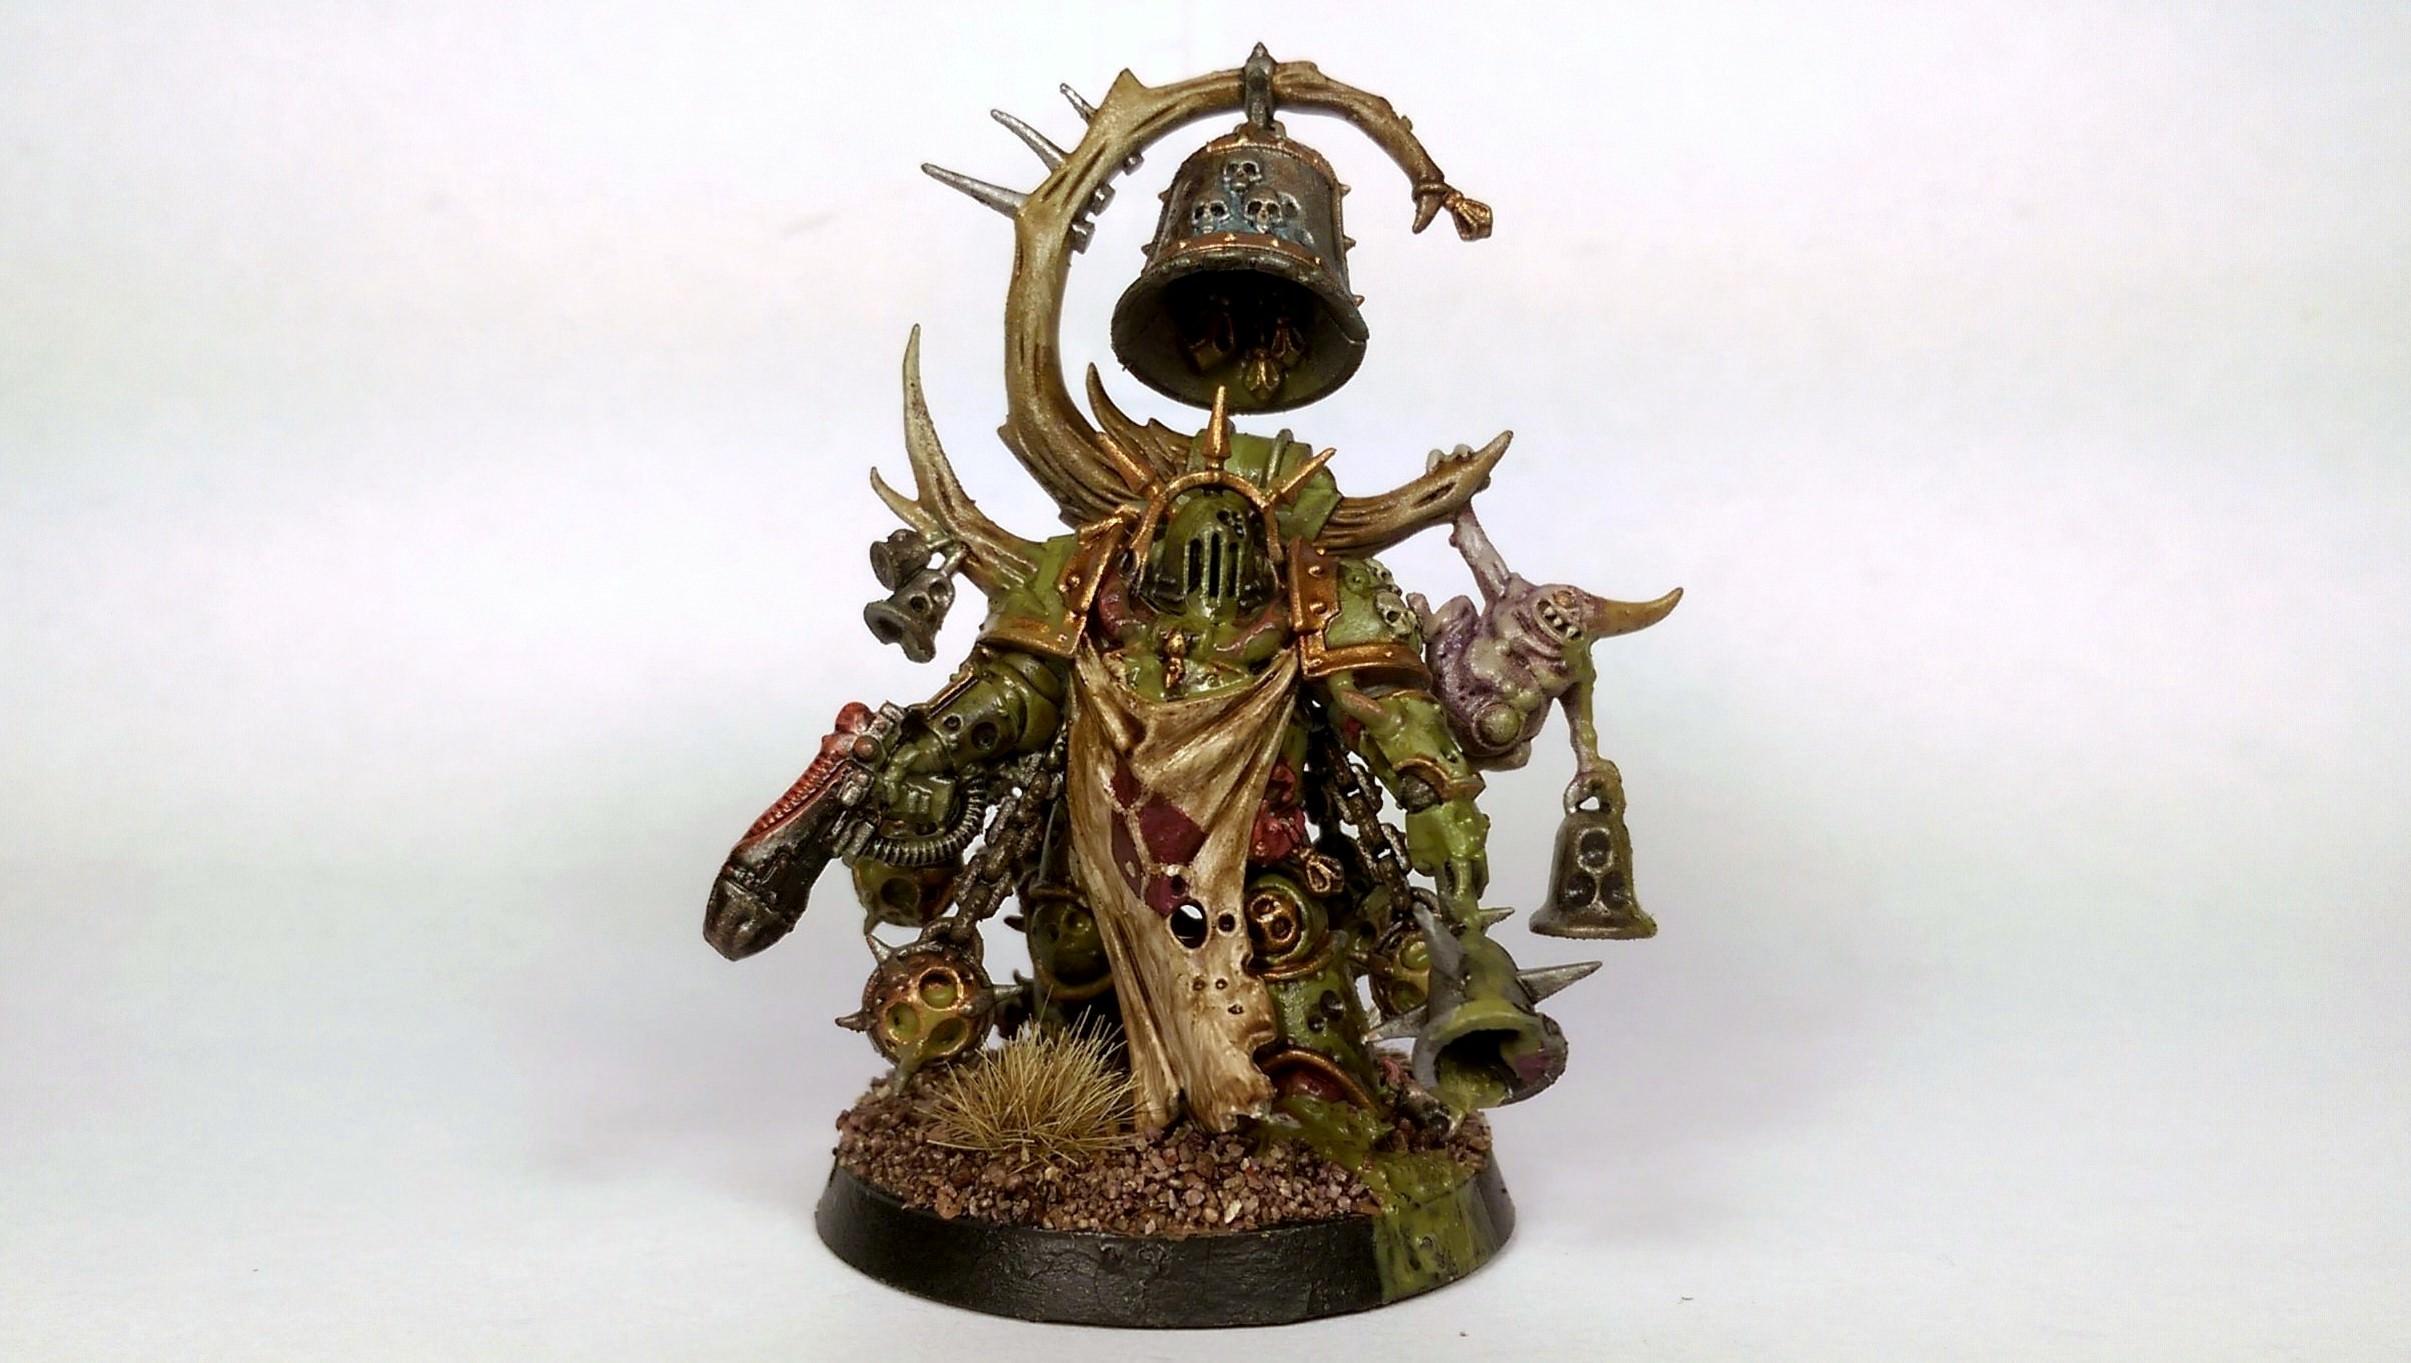 Blightbringer, Chaos Space Marines, Death Guard